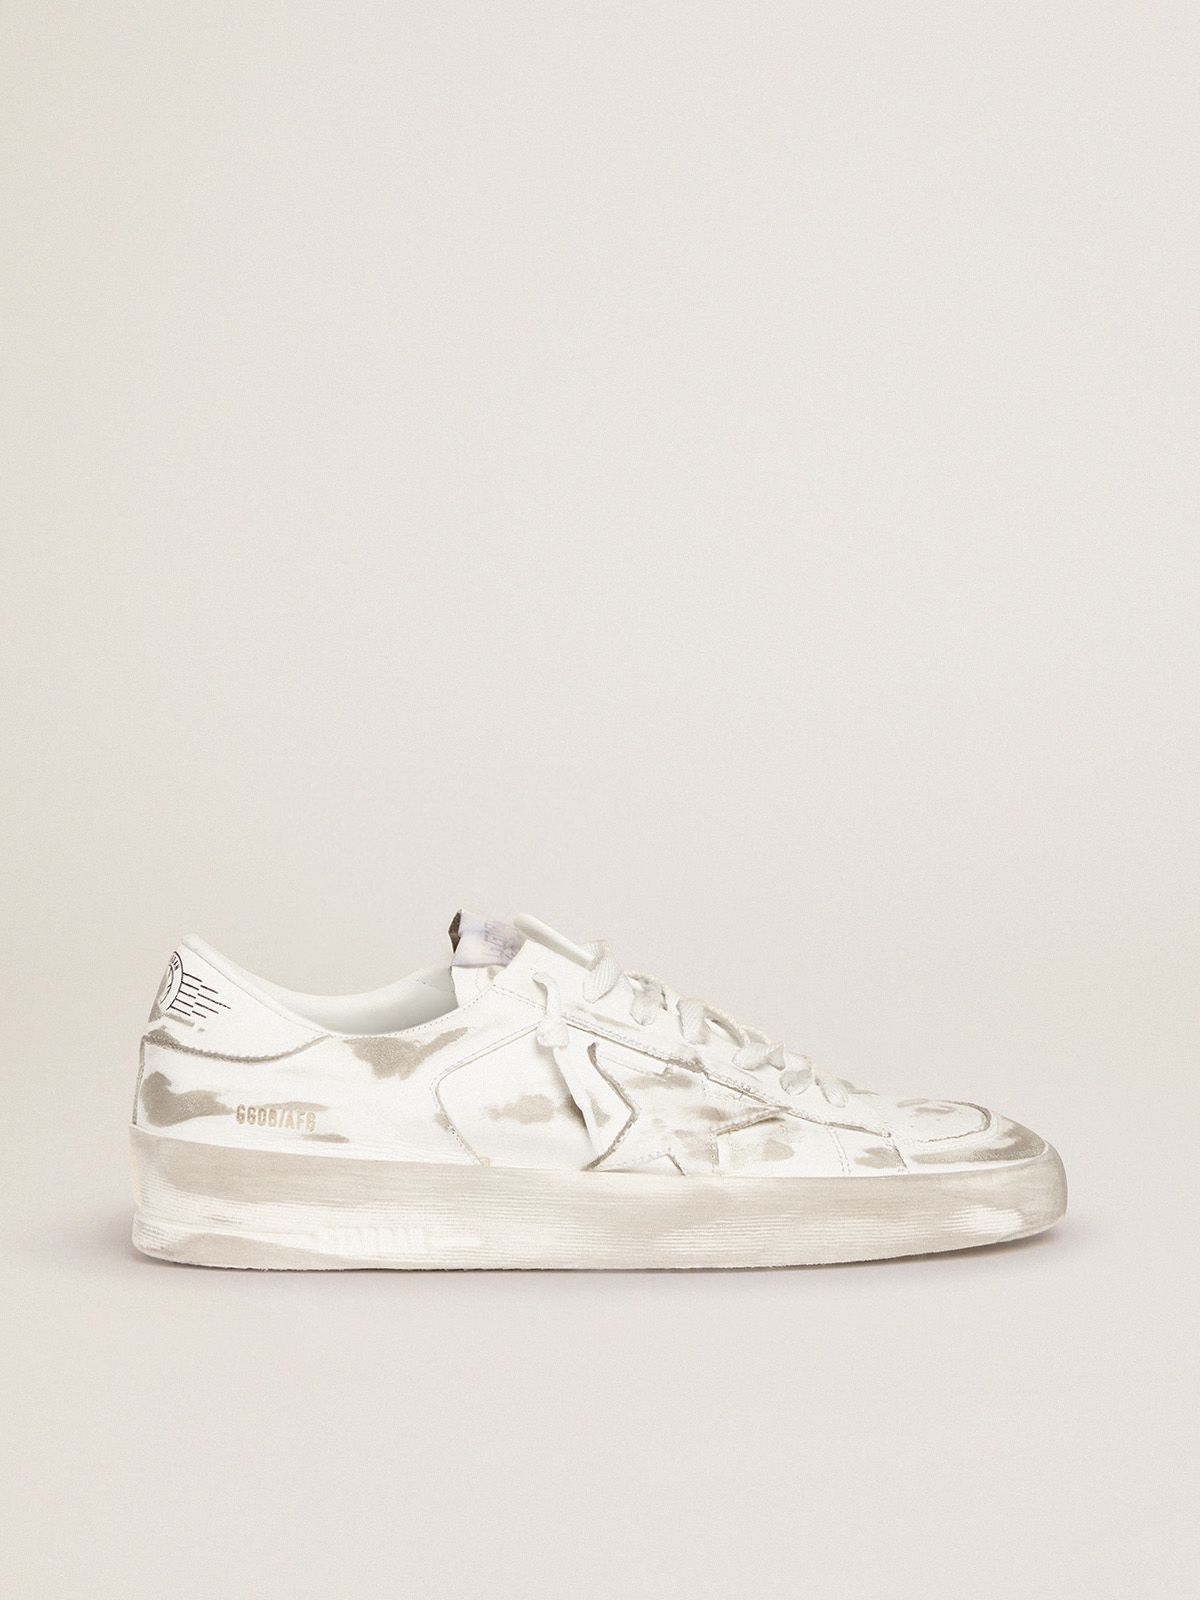 golden goose treatment lived-in with white sneakers leather Stardan in